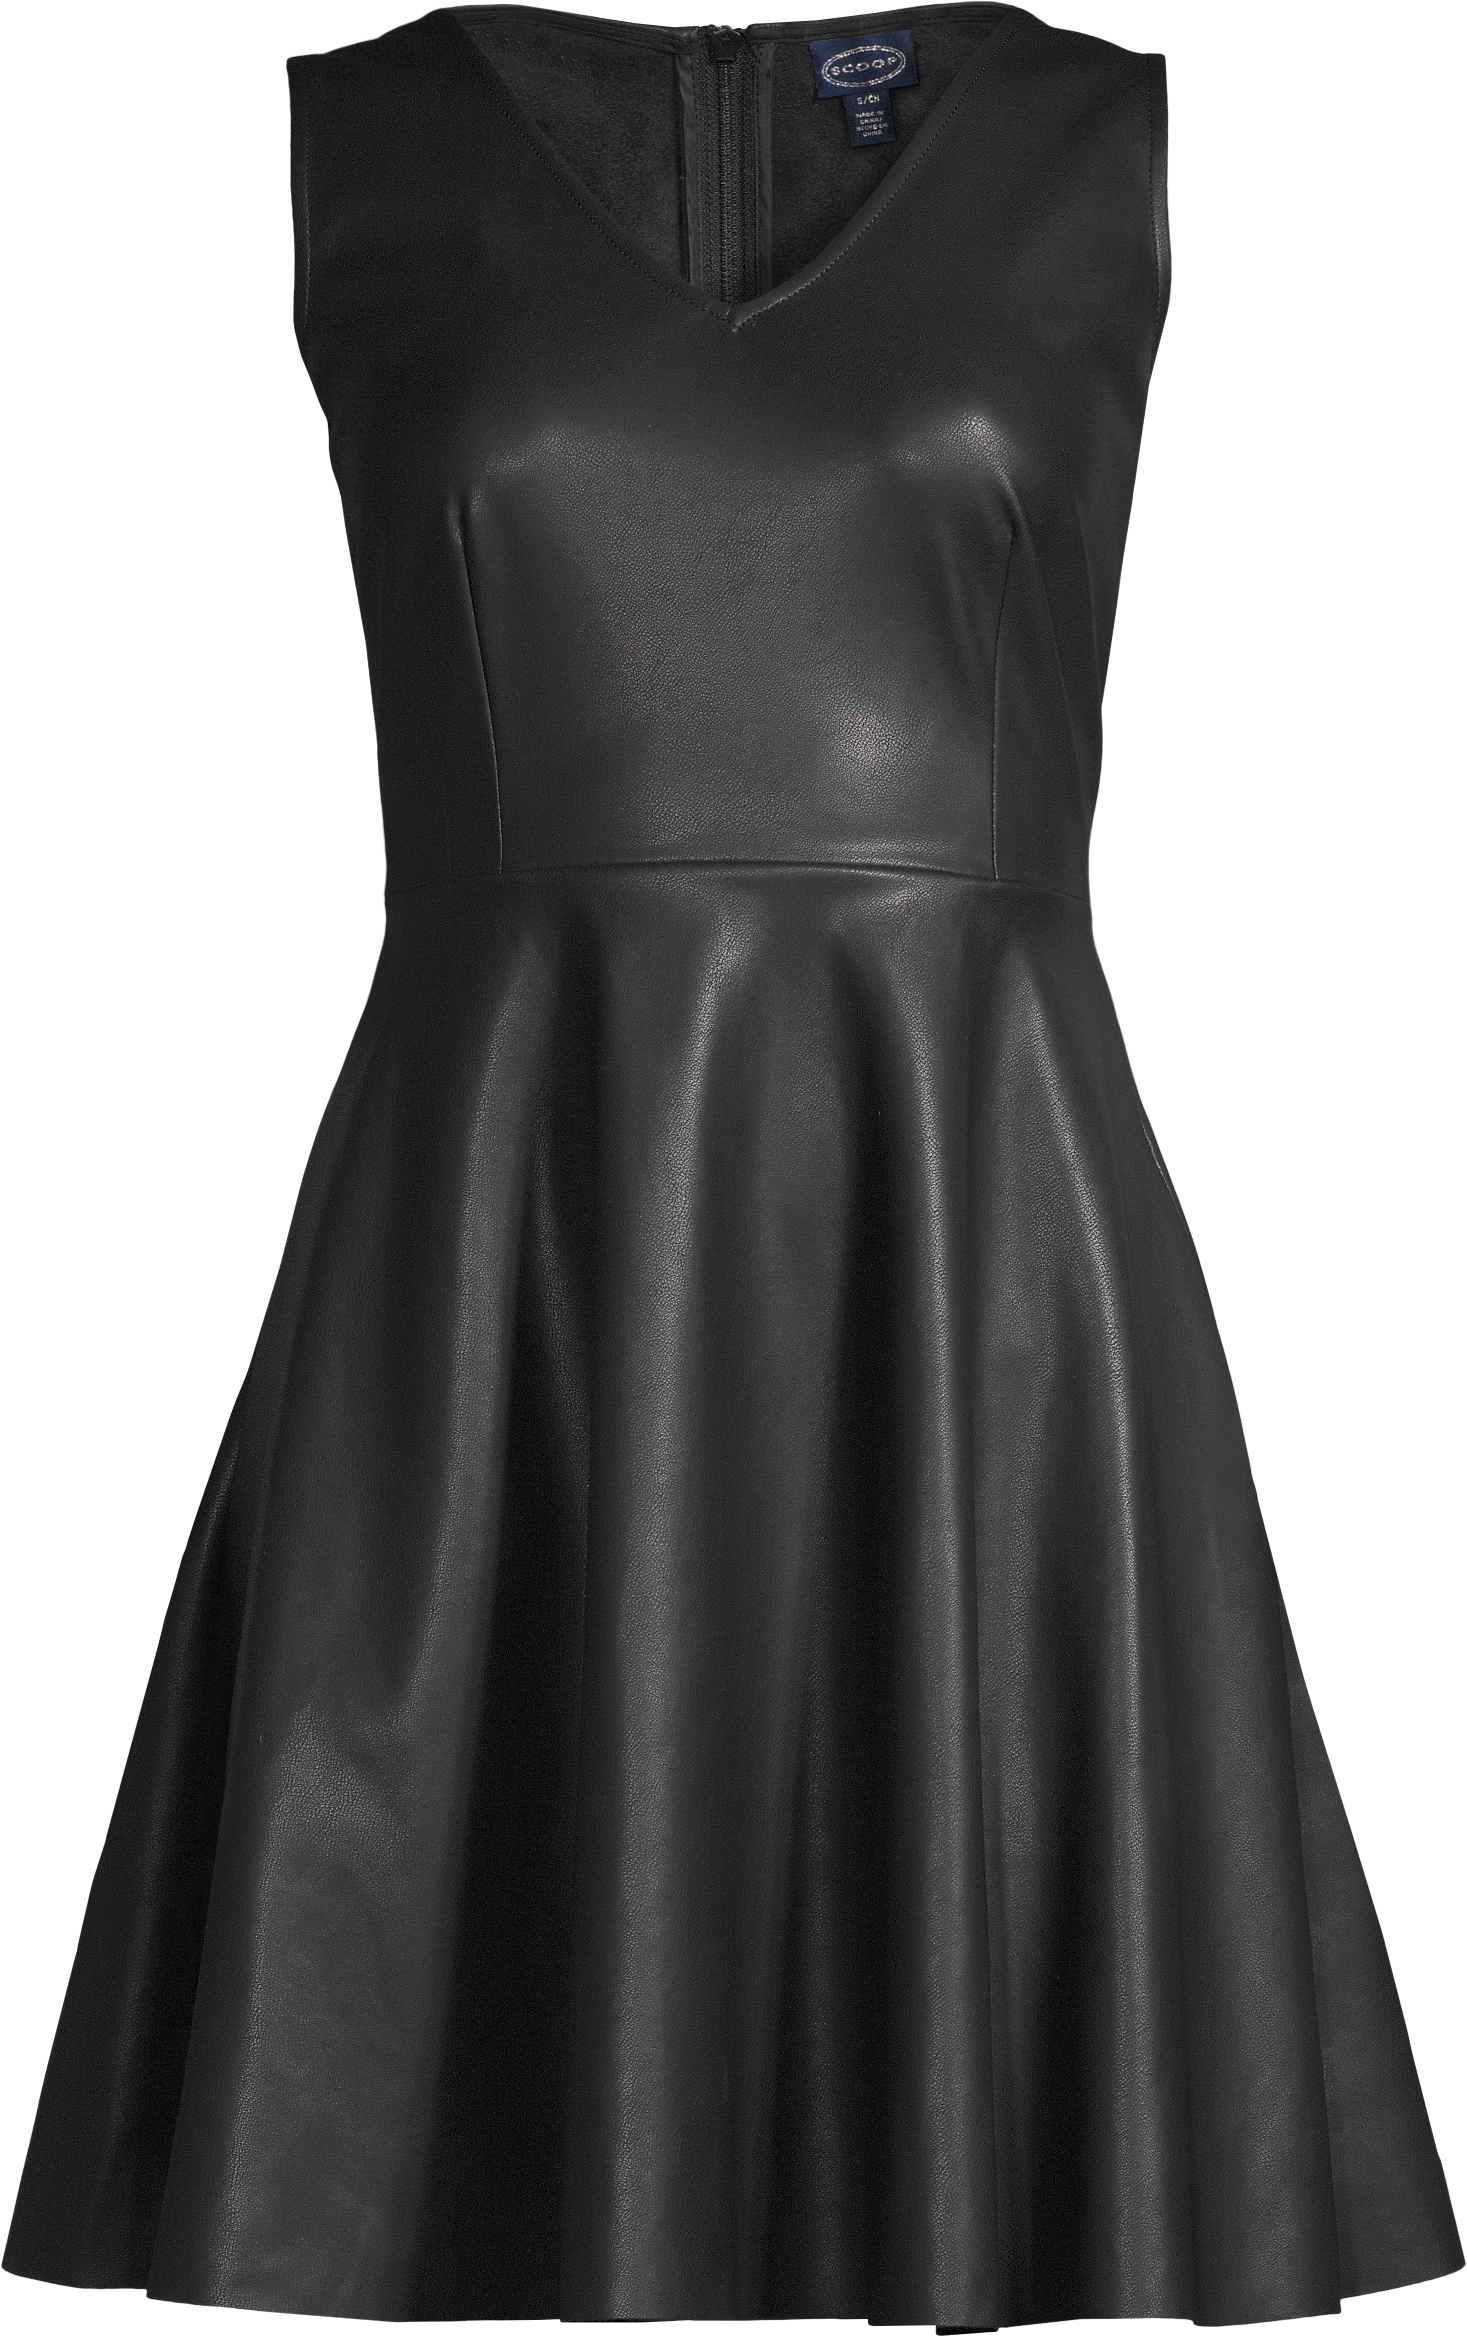 Scoop Vegan Leather Fit and Flare Dress Women's - image 5 of 6